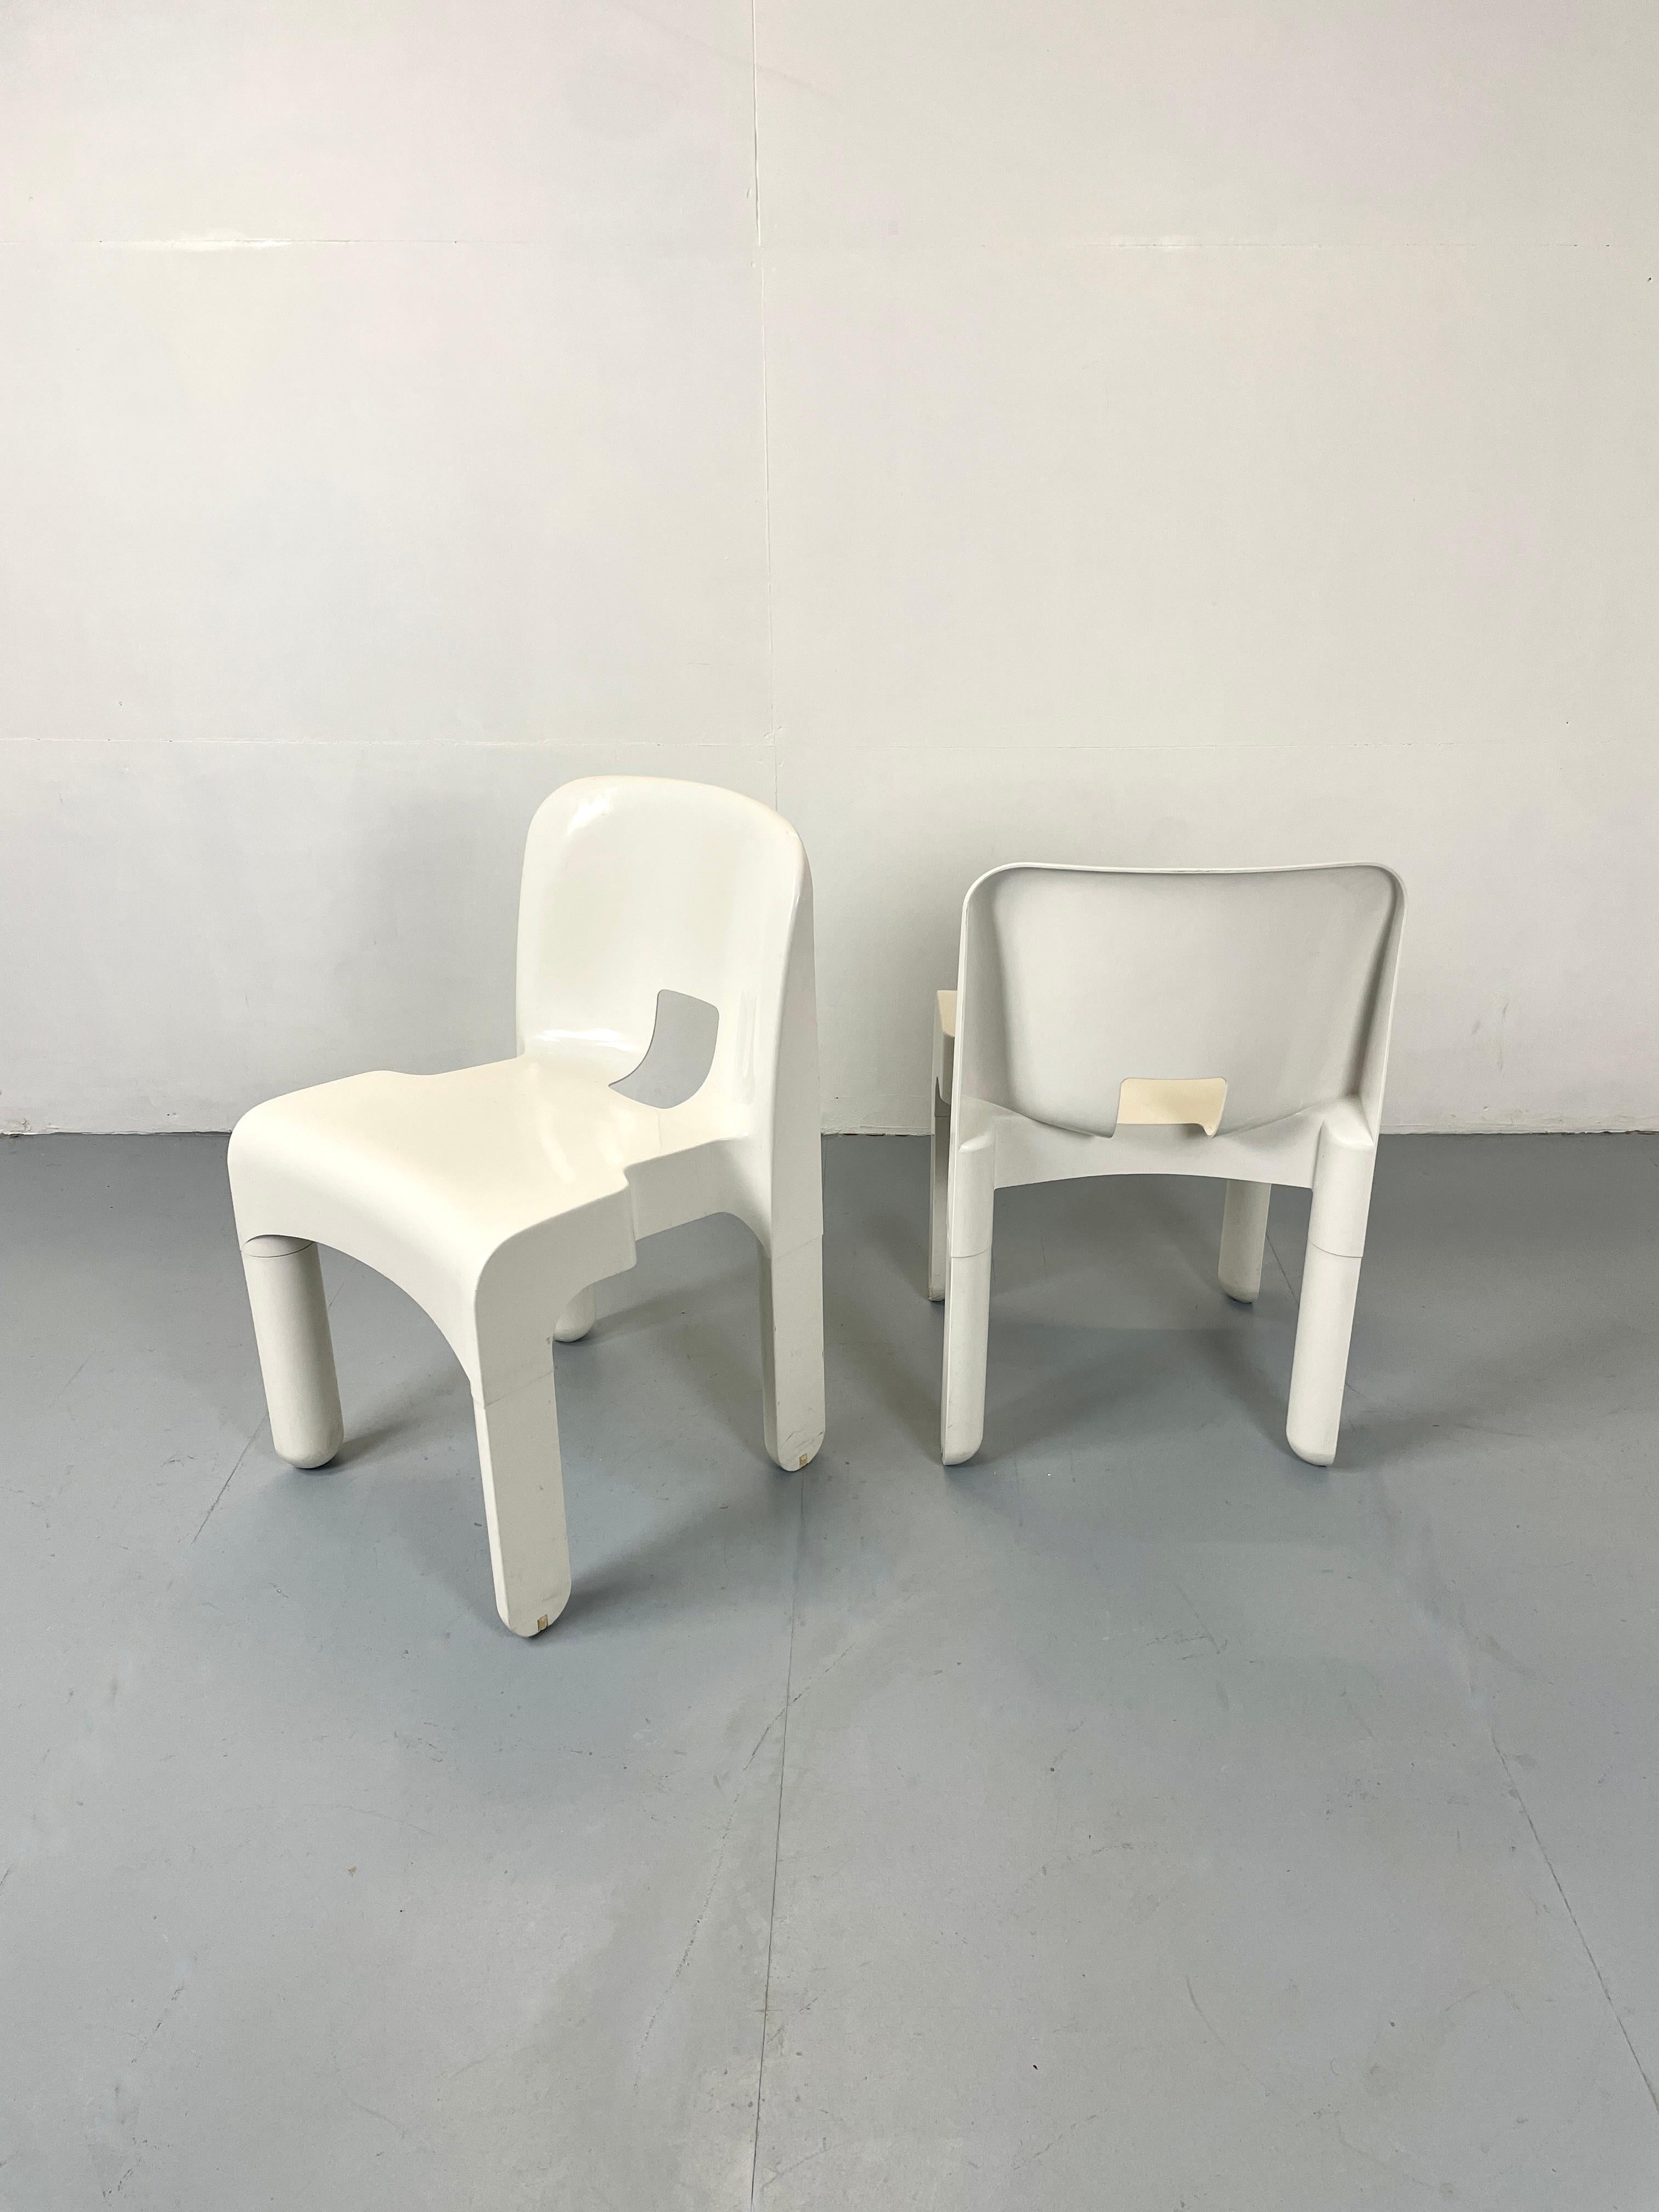  Joe Colombo Universale Plastic Chair for Kartell White Italy Vintage Space Age In Good Condition For Sale In Alsdorf, NW